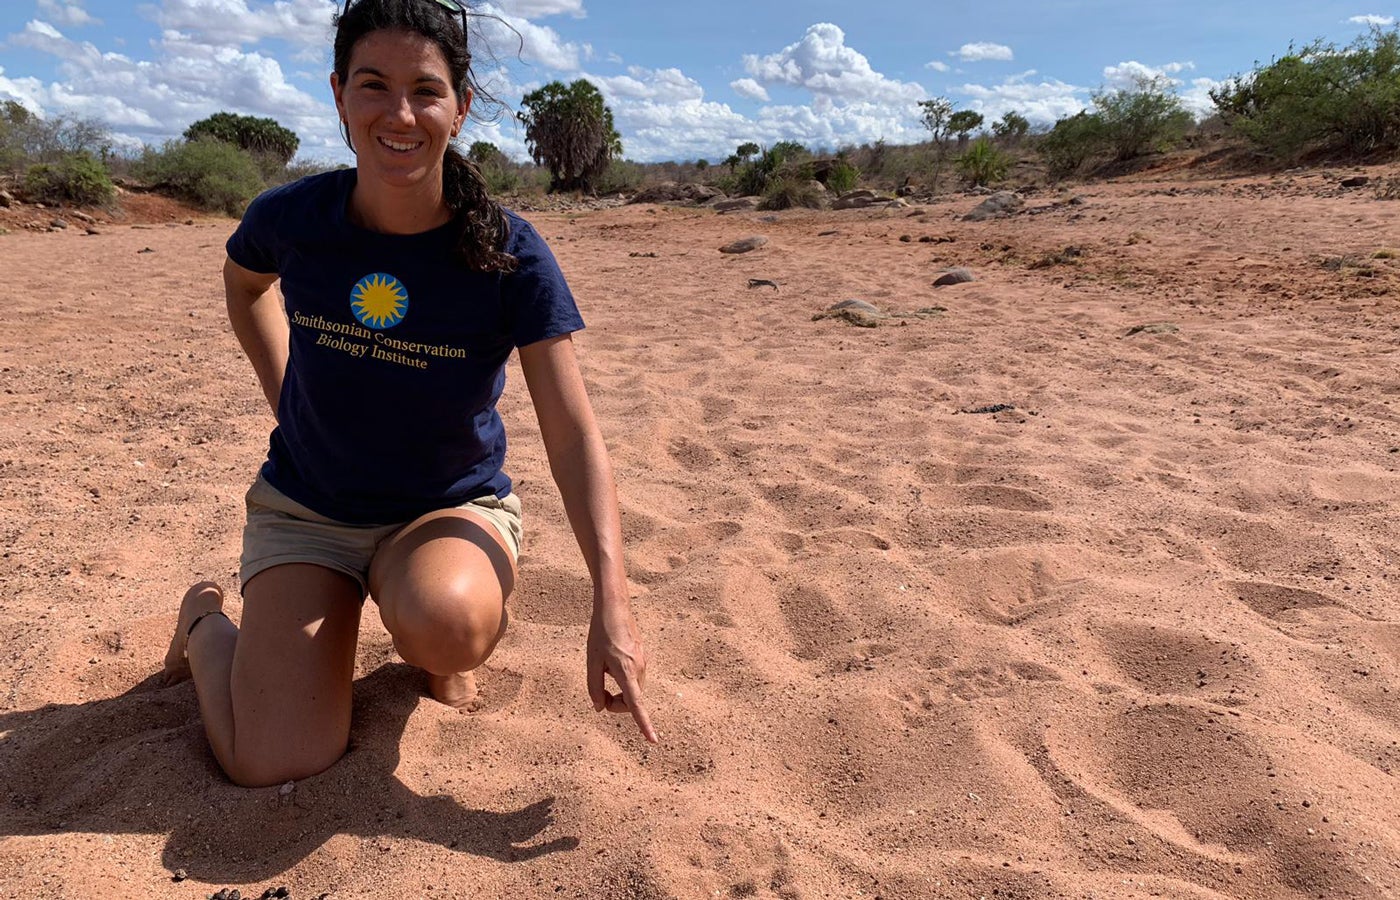 Francesca Vitali takes a knee in a sandy area in Kenya. She's wearing a navy Smithsonian Conservation Biology Institute T-shirt. She points to wildlife footprints in the sand.